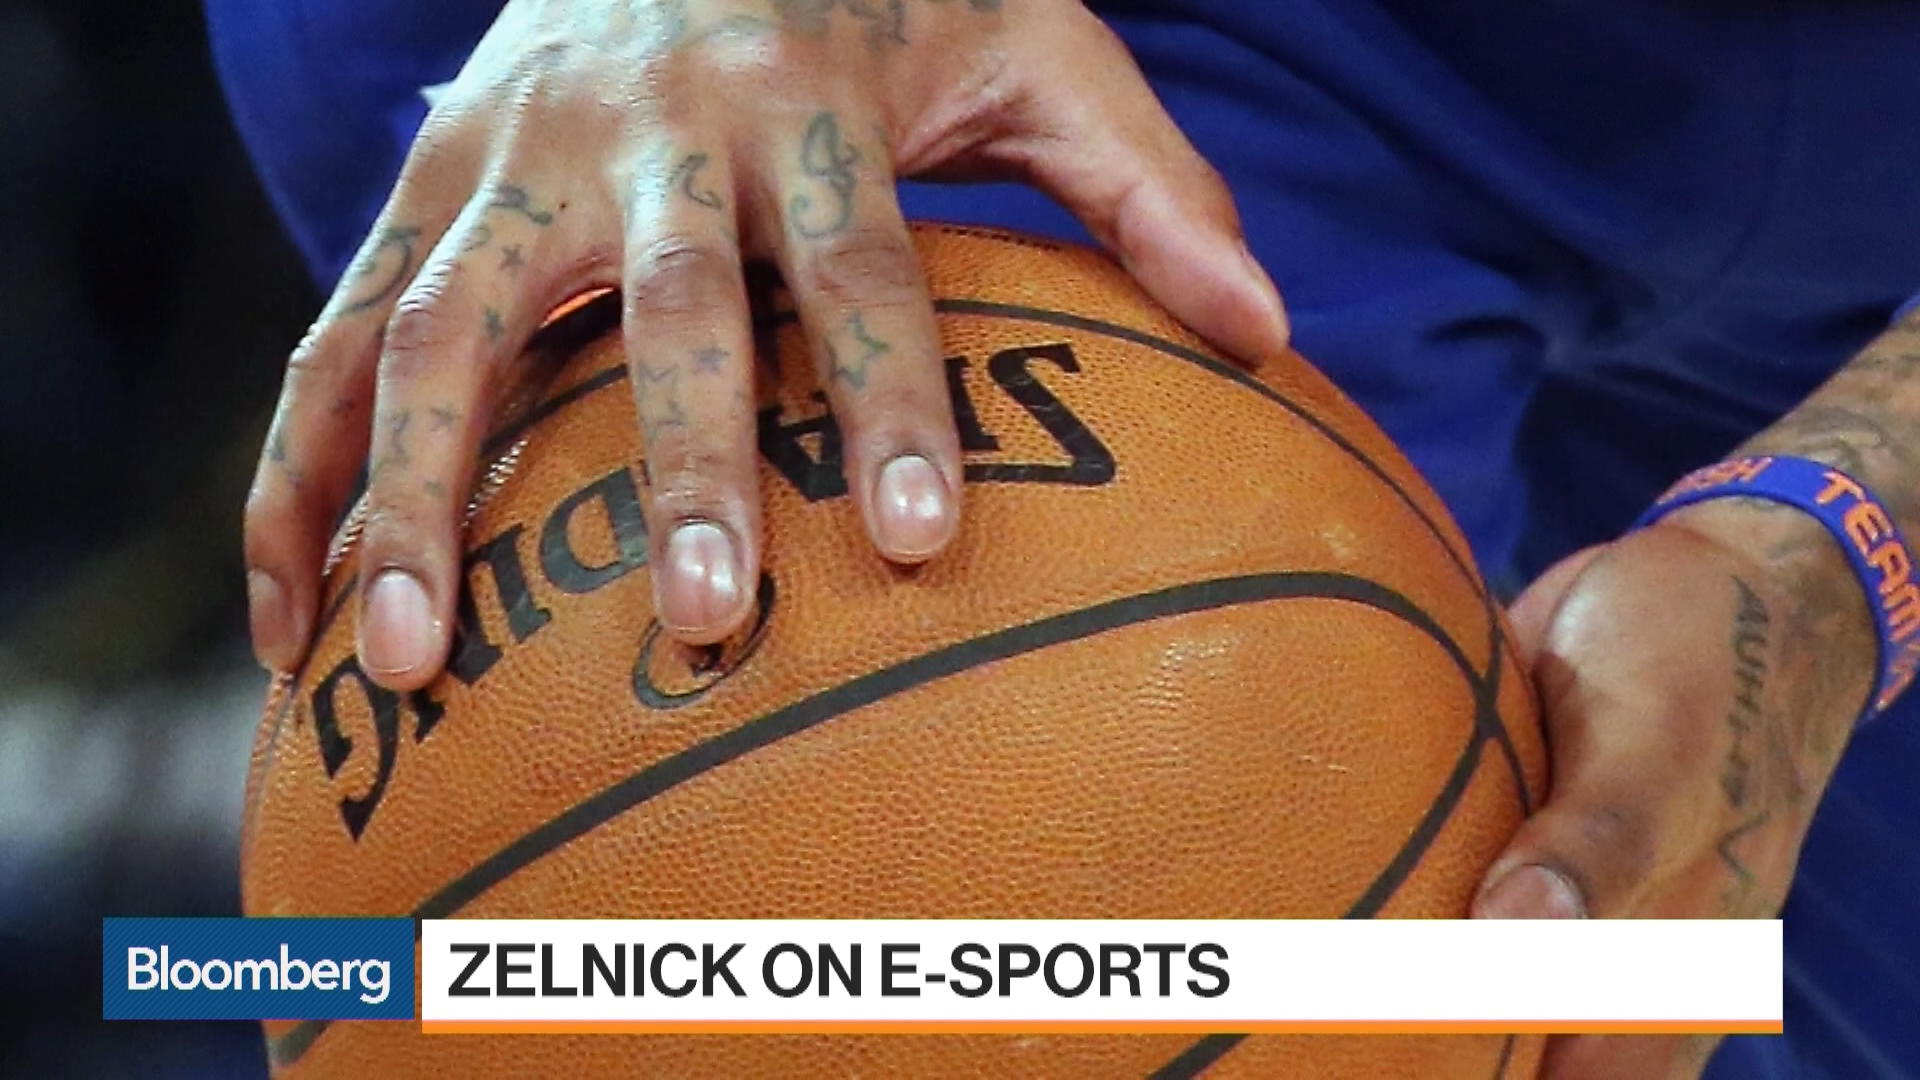 Take Two Ceo Zelnick Says Nba 2k Engagement Is Unbelievable Images, Photos, Reviews